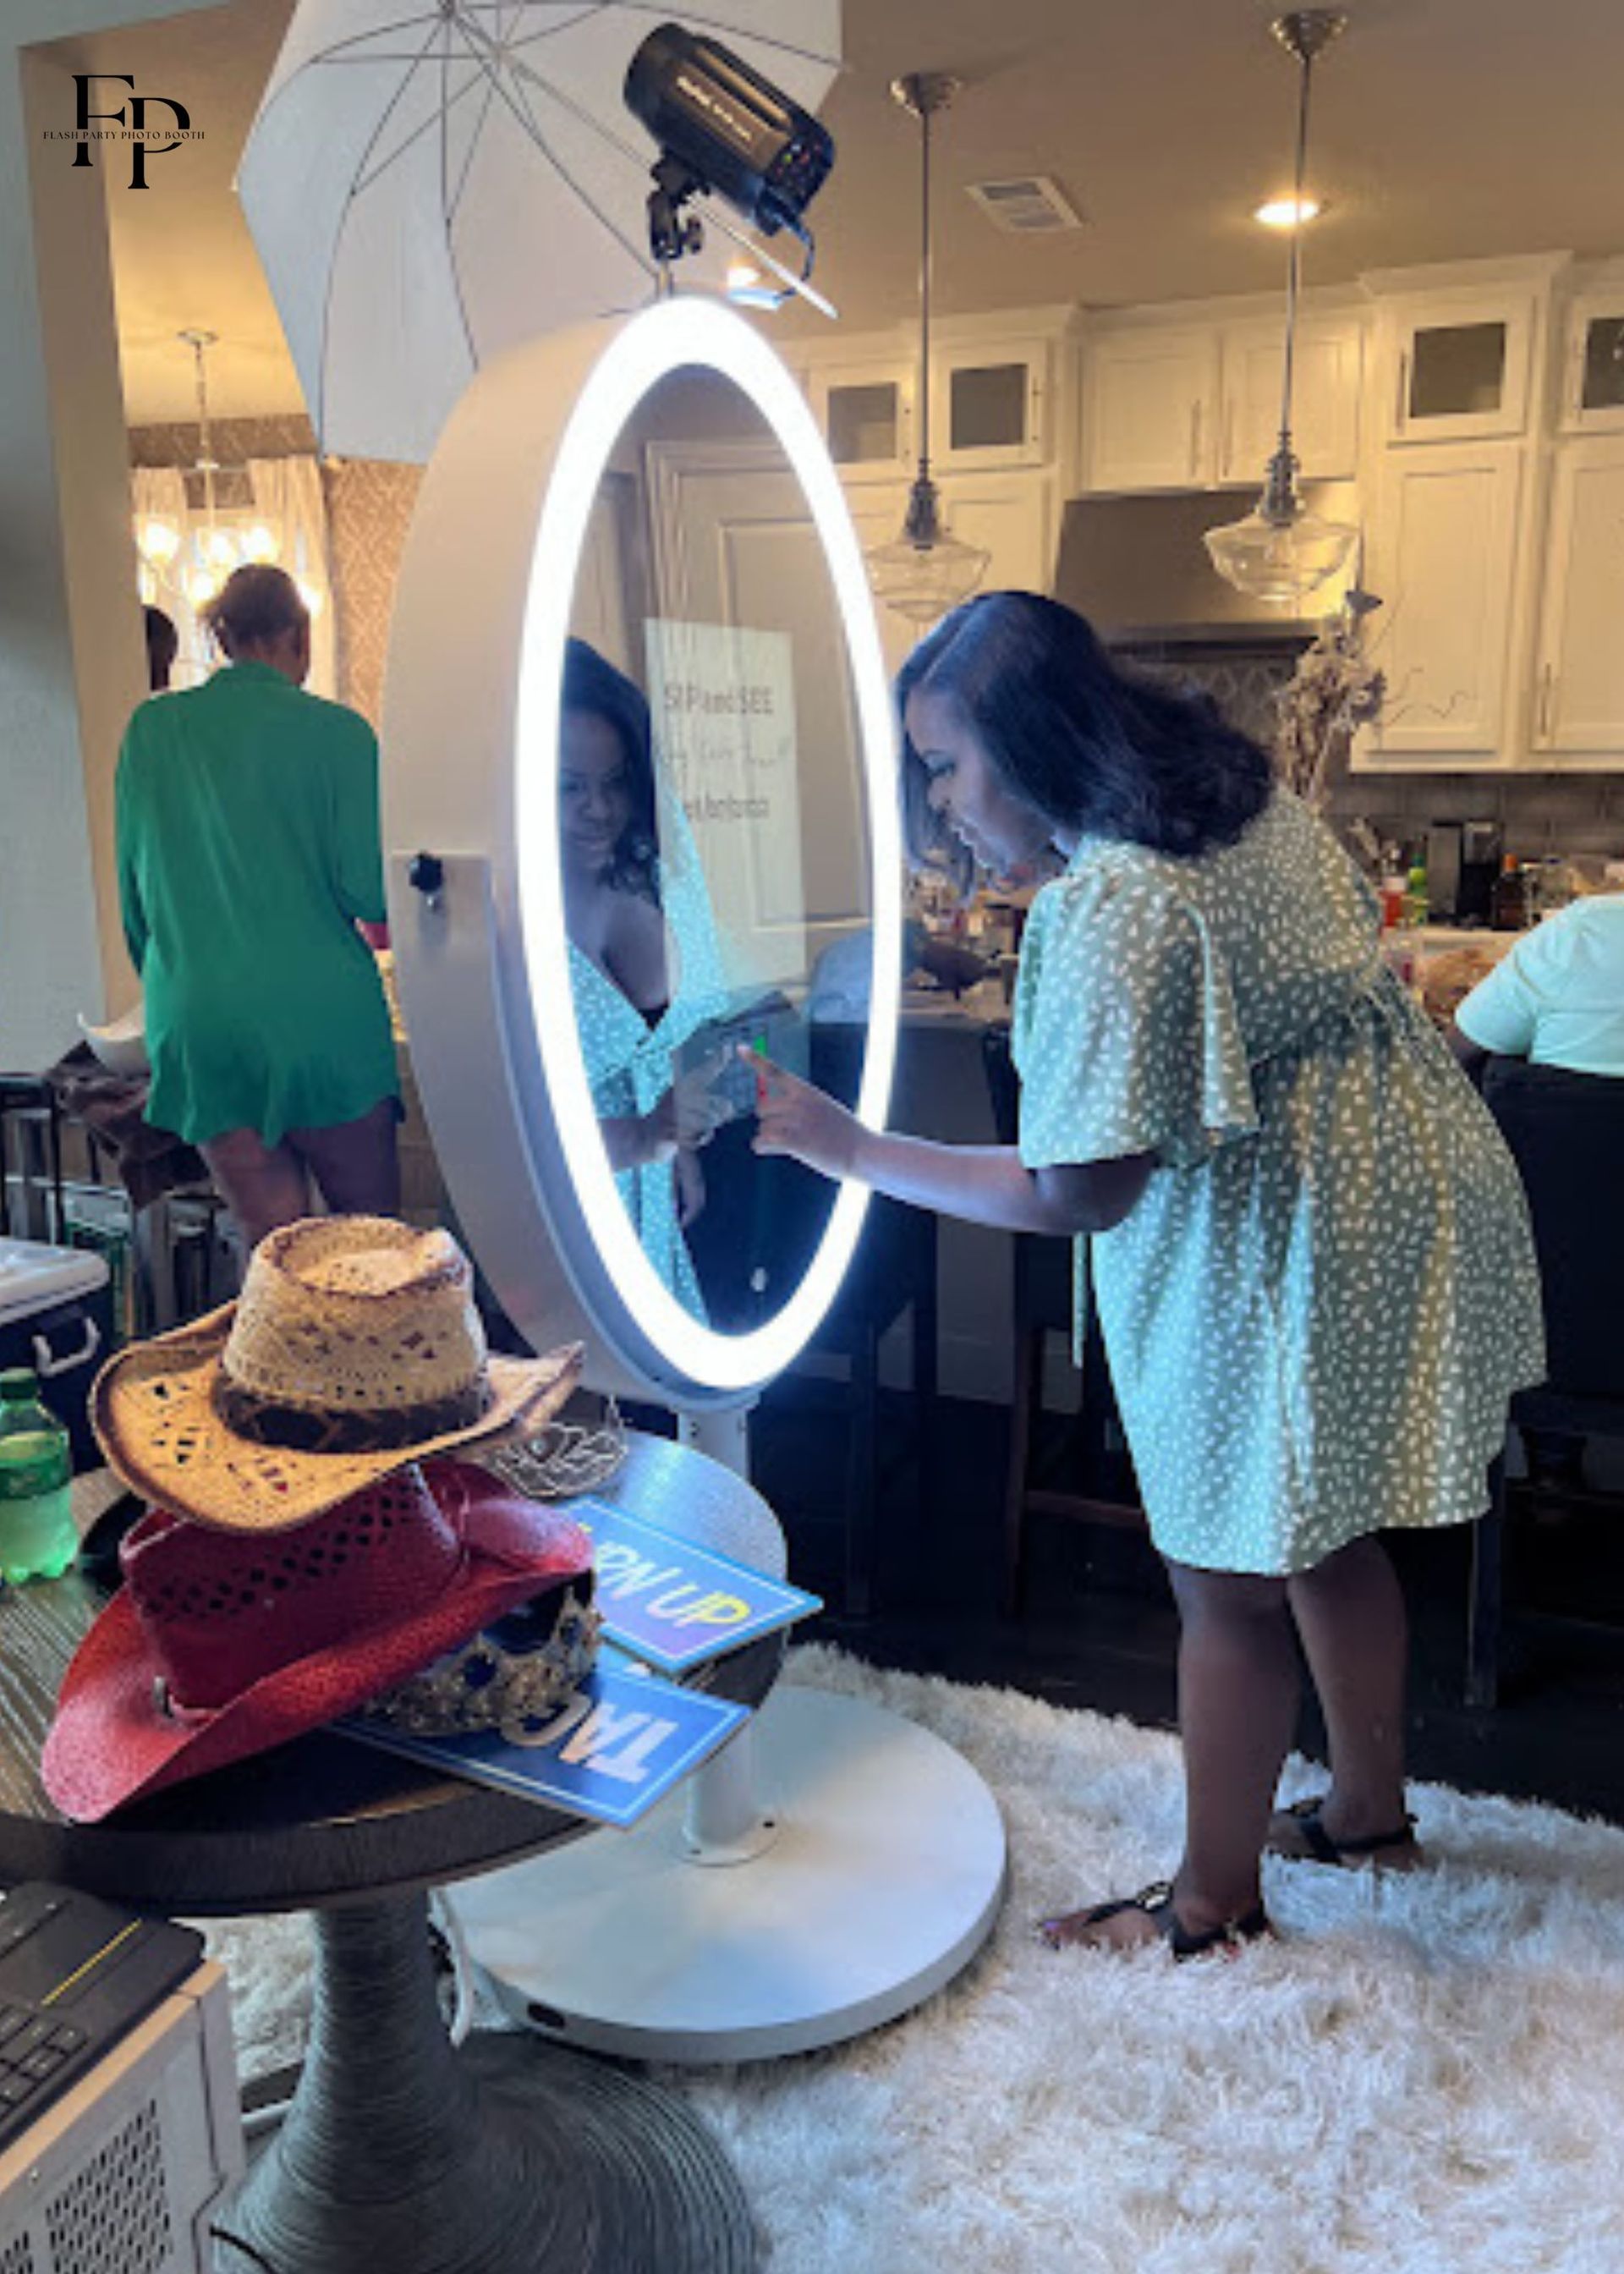 A woman getting ready to pose for a picture at an Oval Mirror Photo Booth.